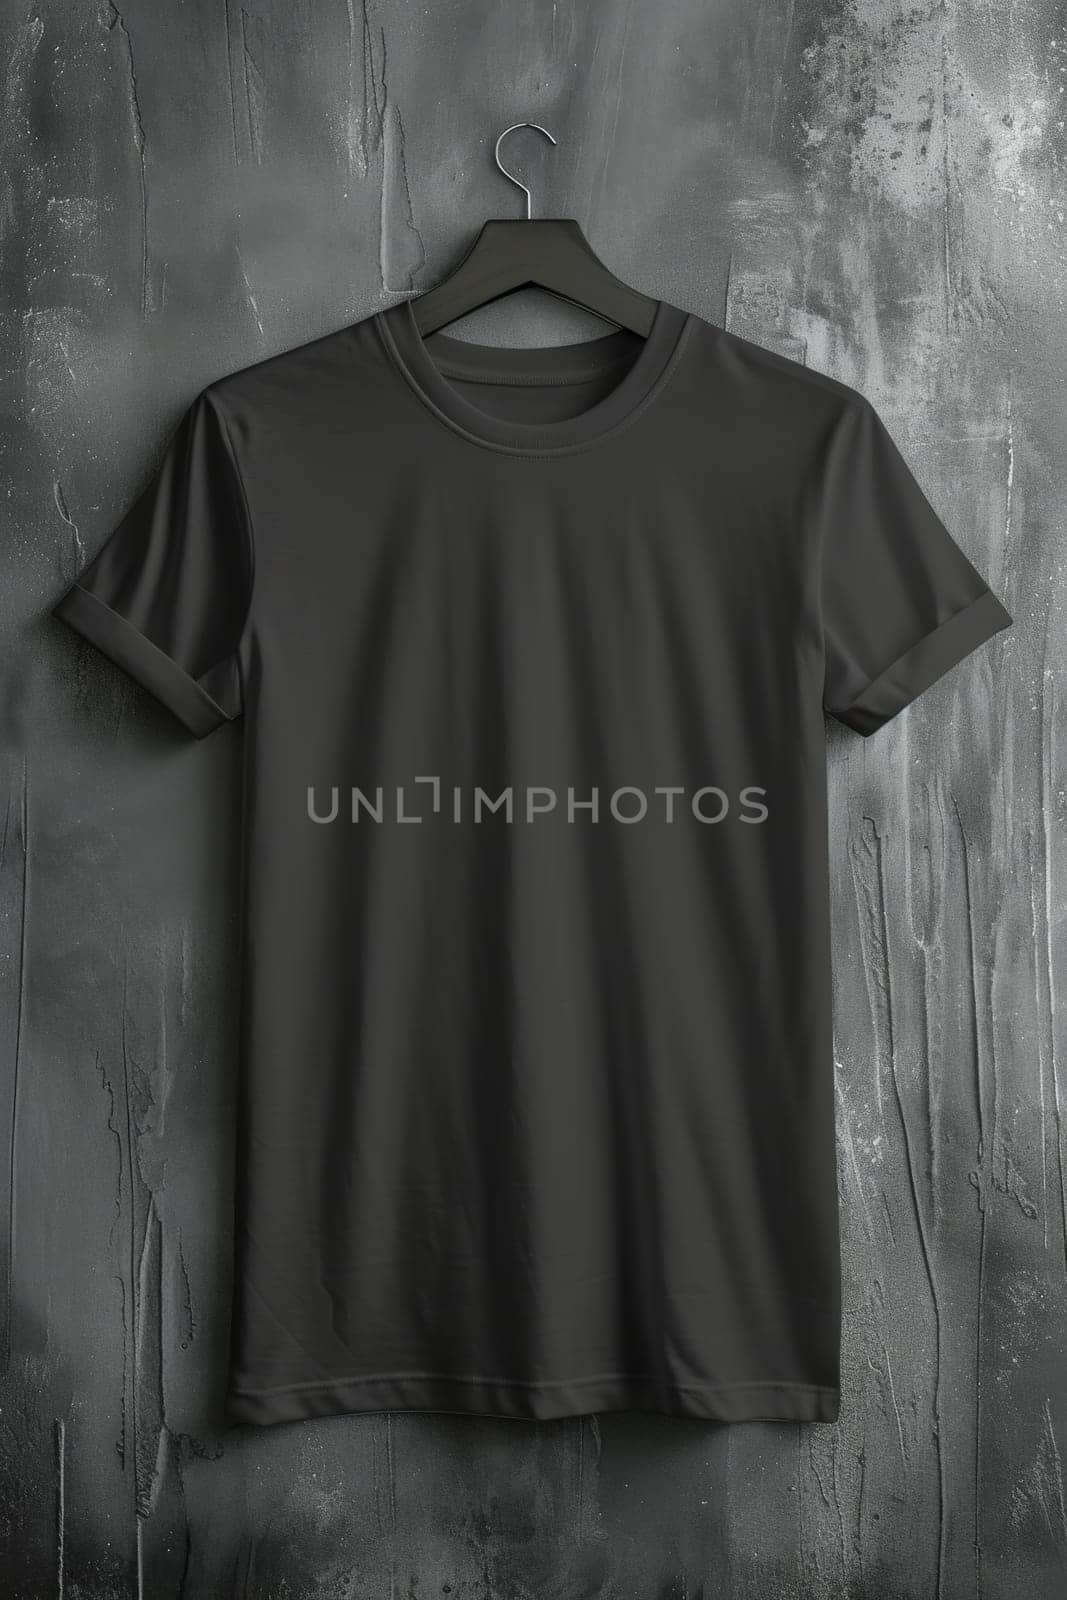 A mock-up of an empty black T-shirt with accessories on the table. lifestyle concept.